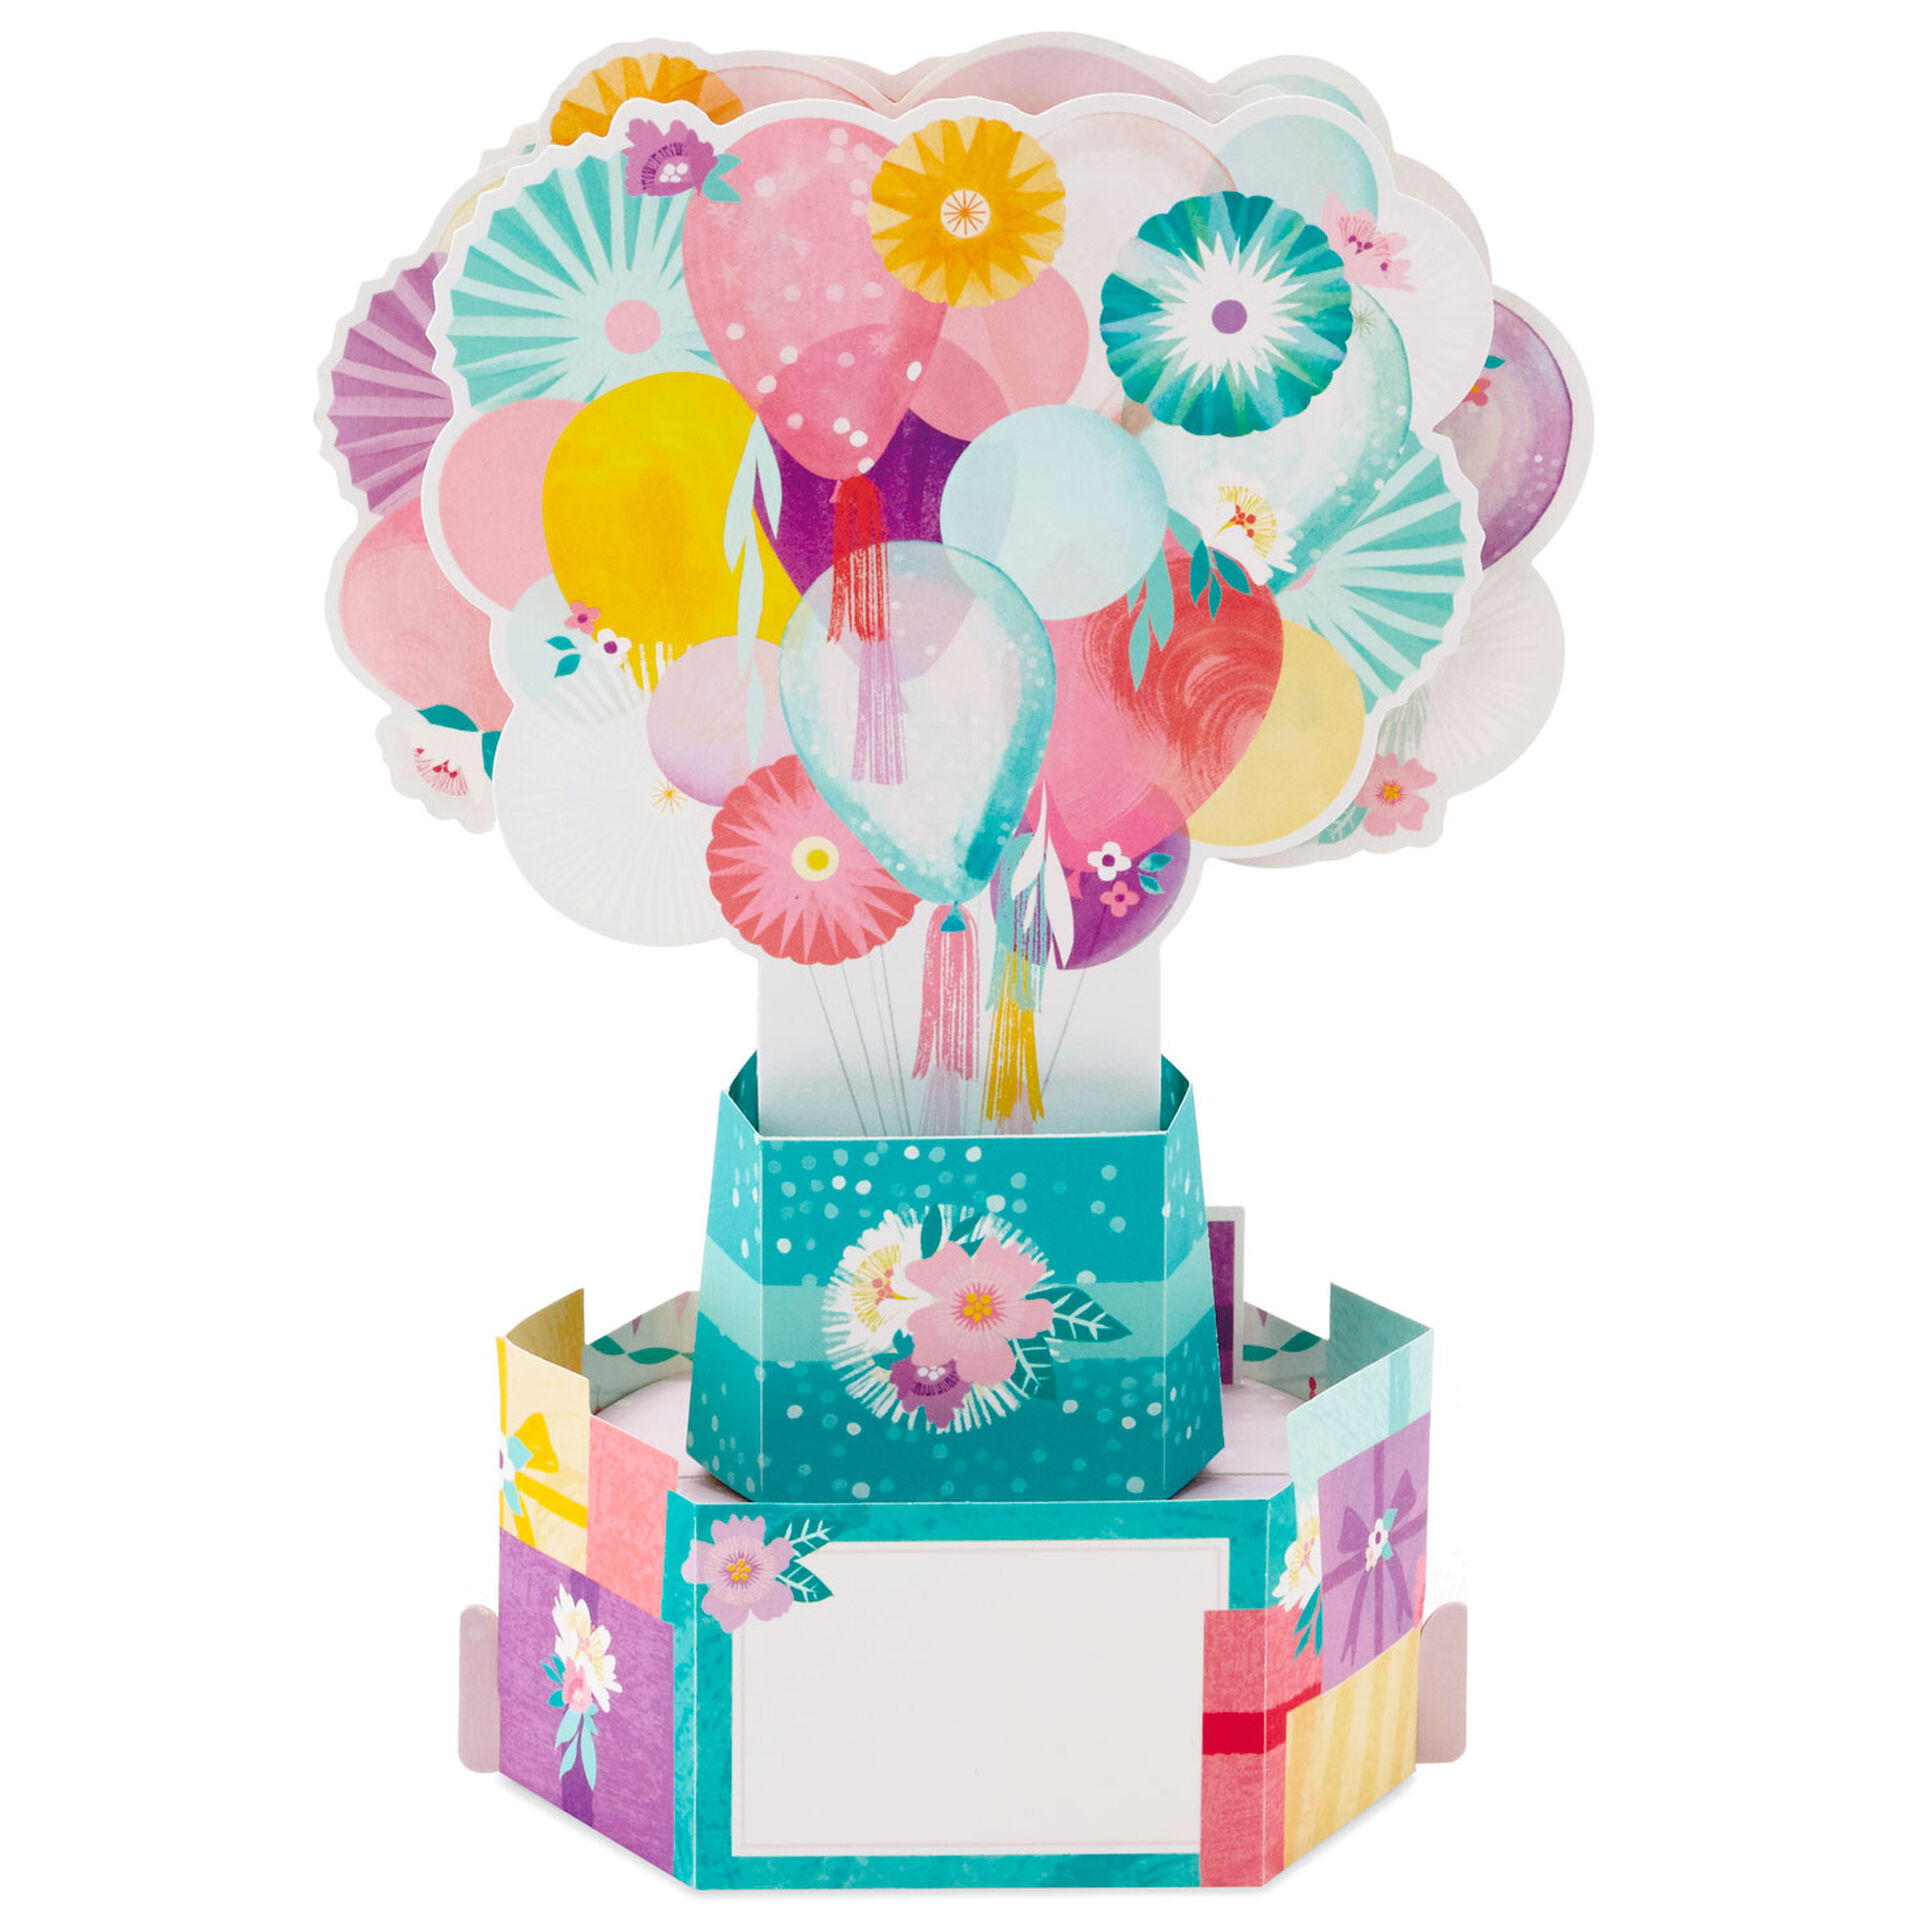 Balloons-and-Presents-3D-PopUp-Birthday-Card_799WDR1101_03